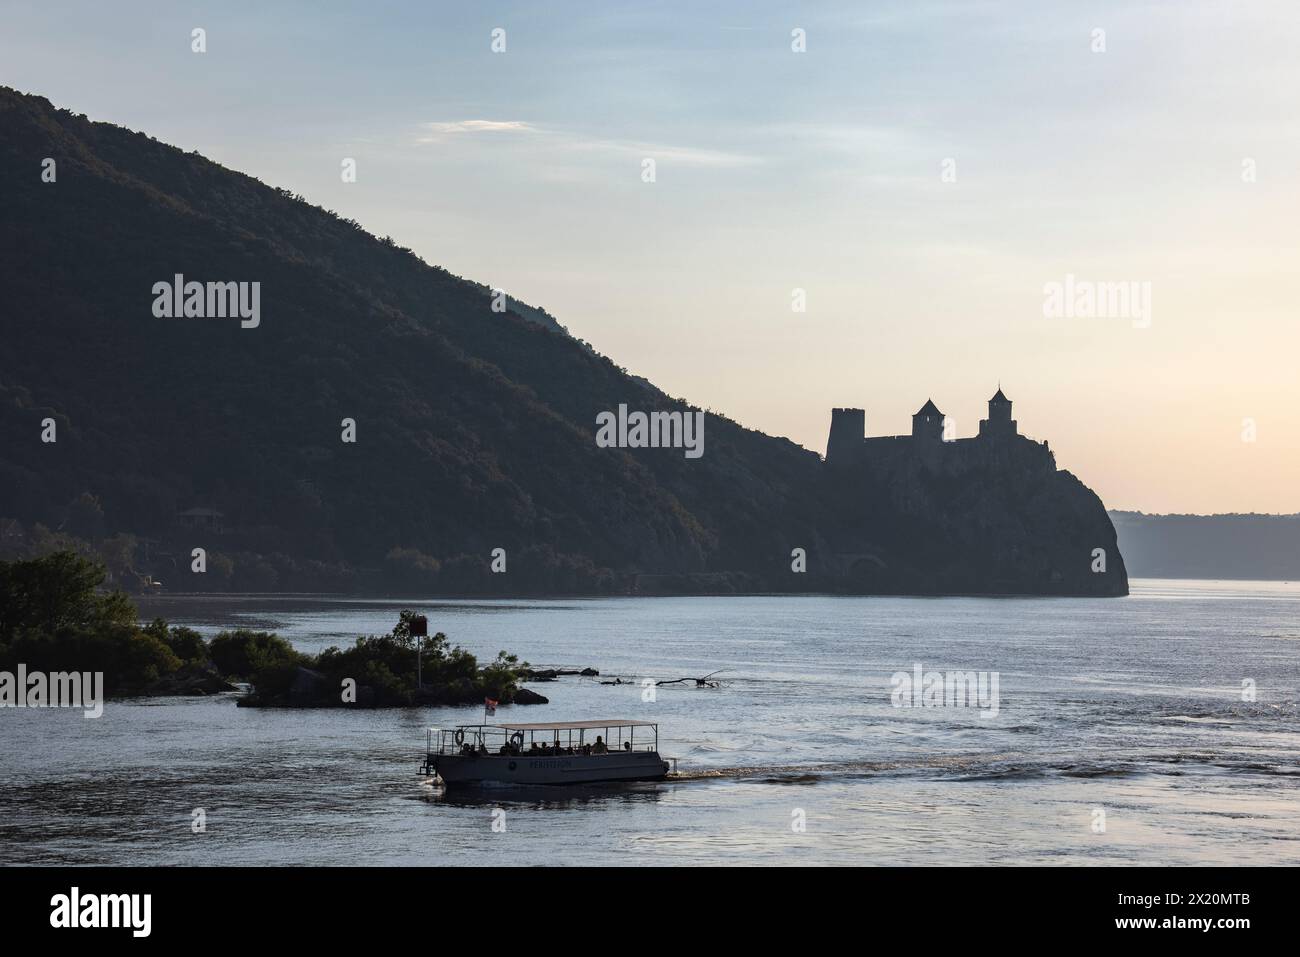 Silhouette of excursion boat in the Iron Gates gorge of the Danube with the Golubac Fortress in the distance, Golubac, Braničevo, Serbia, Europe Stock Photo